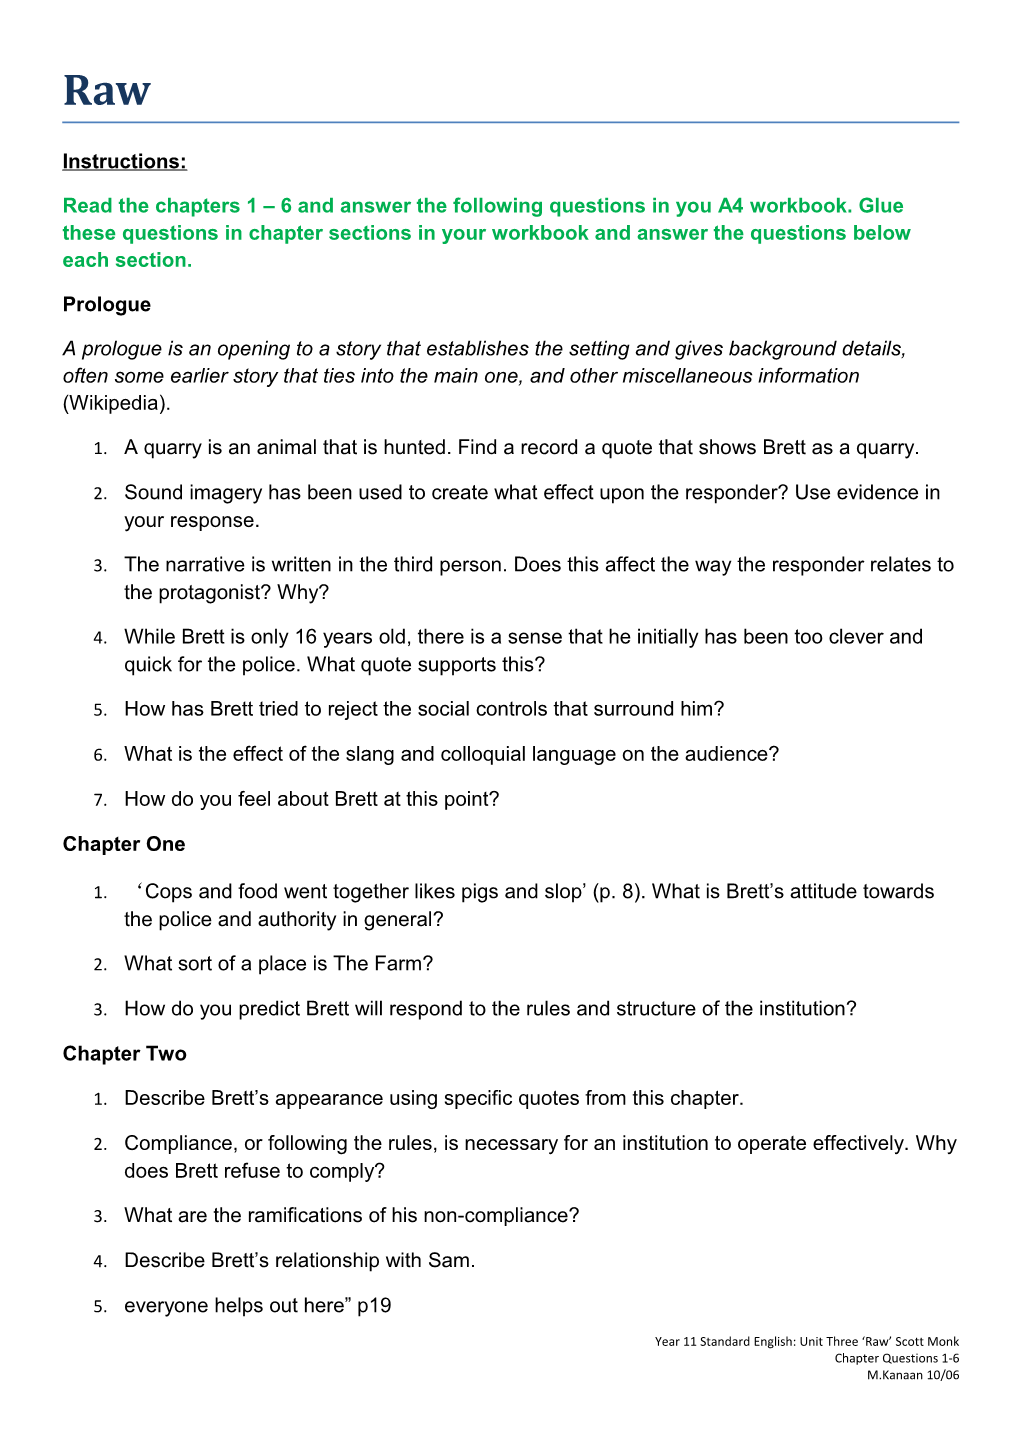 Read the Chapters 1 6 and Answer the Following Questions in You A4 Workbook. Glue These